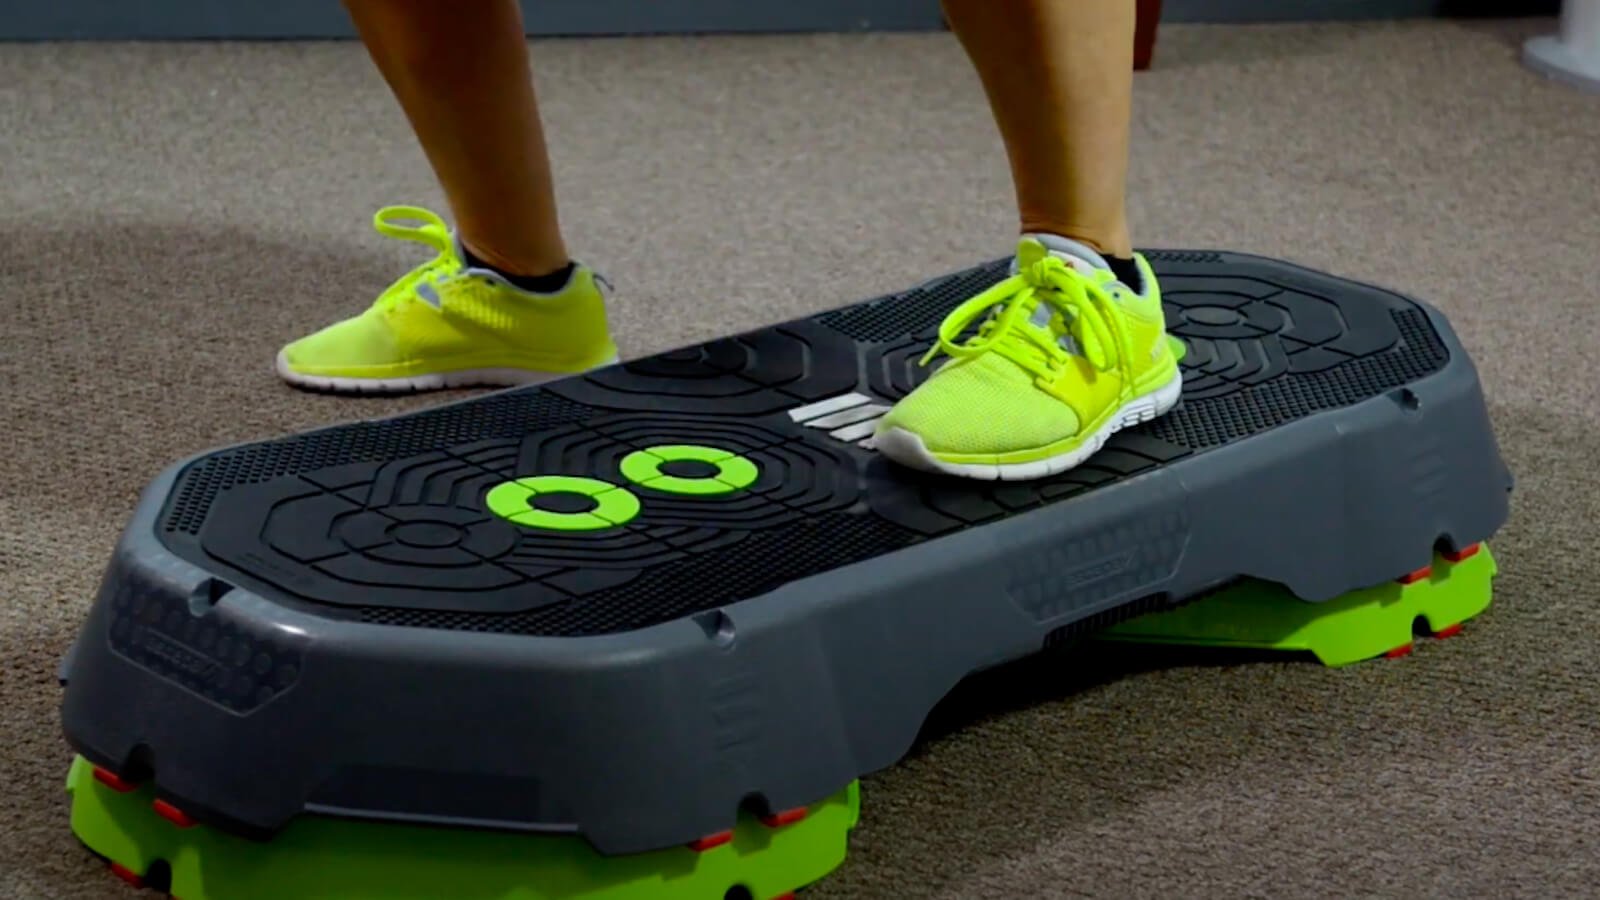 Escape Fitness STEP System Aerobic Platform makes your workouts challenging